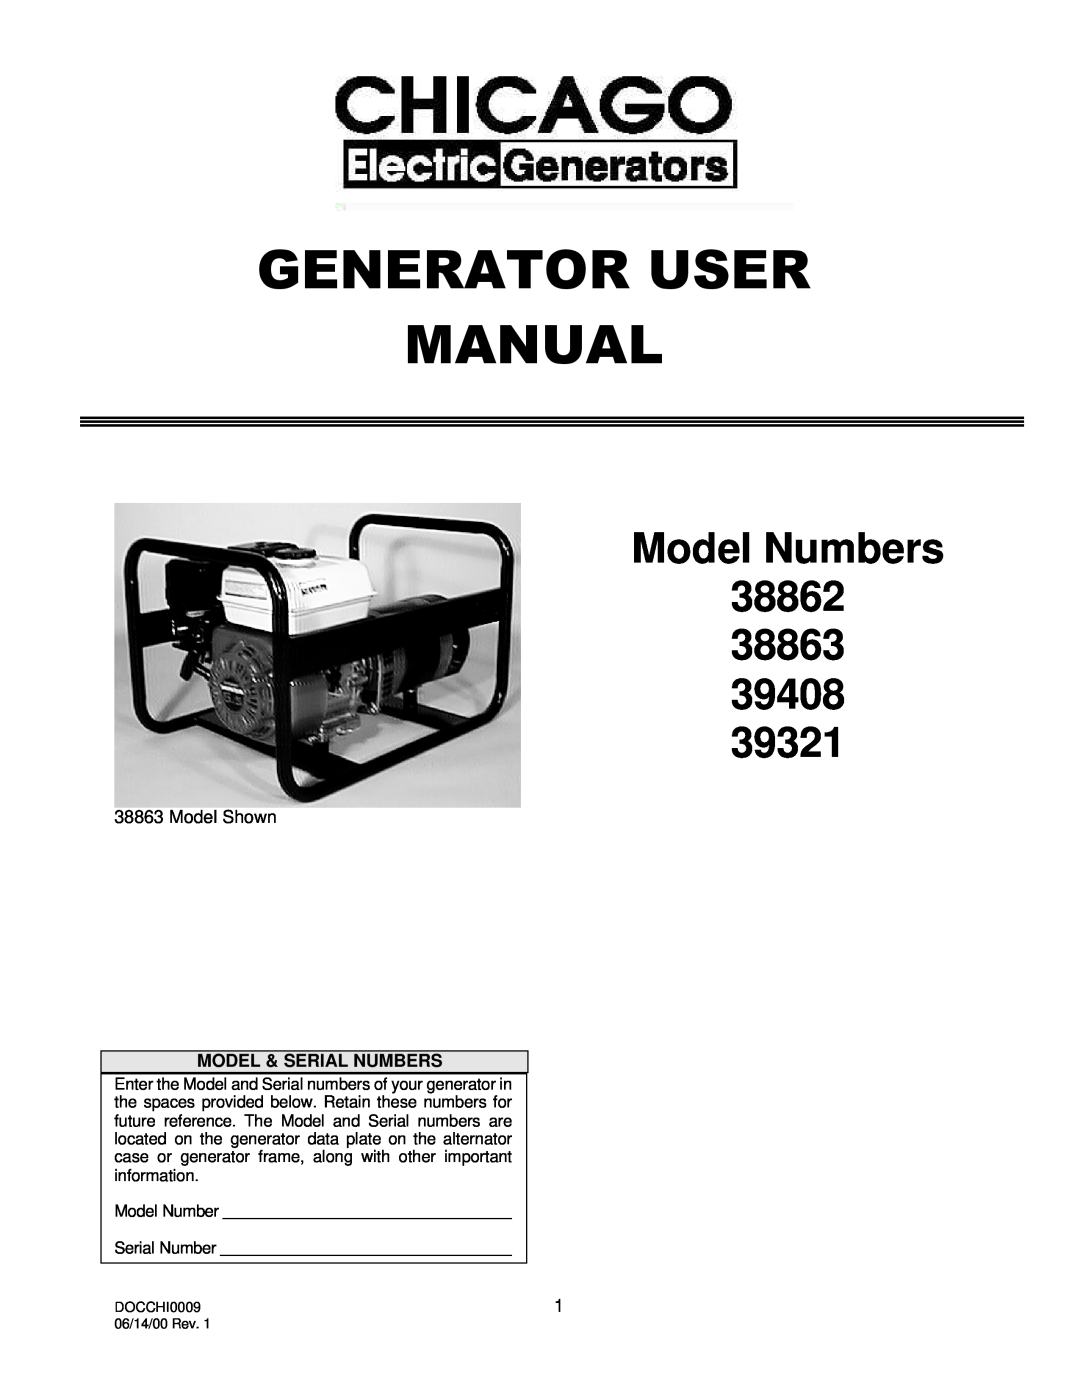 Chicago Electric 39408, 38862, 38863, 39321 user manual Model Numbers 